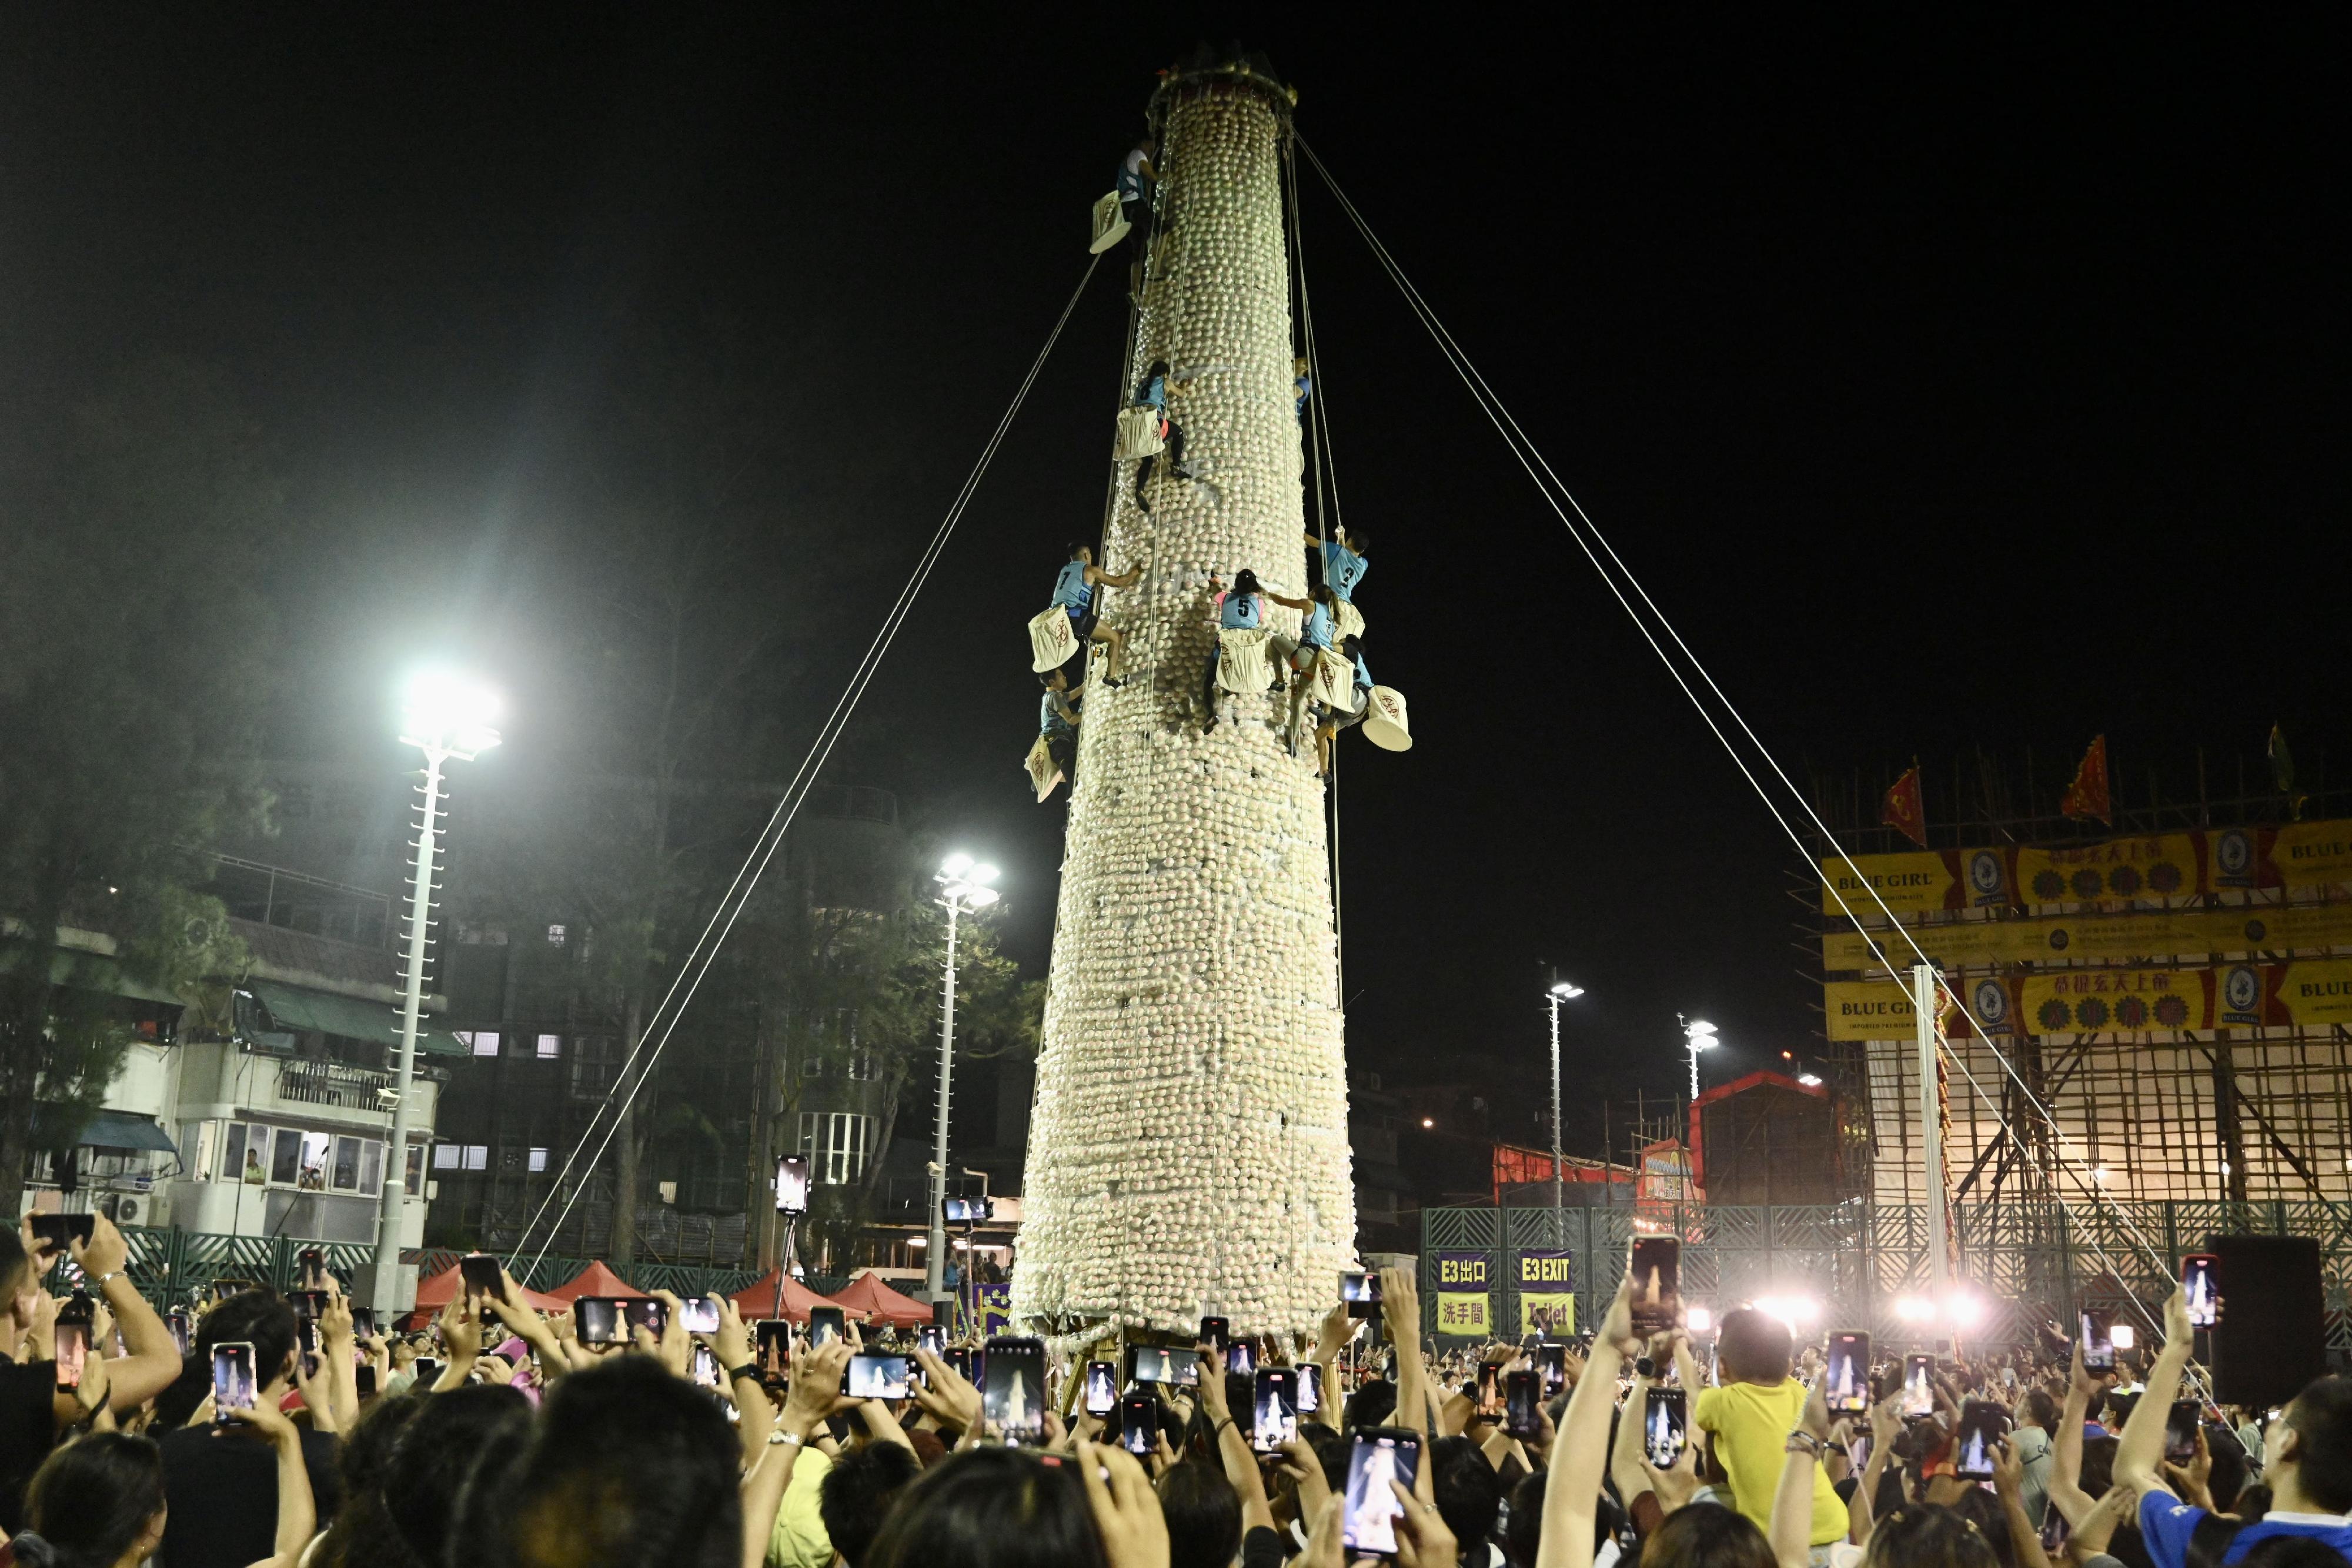 The Bun Scrambling Competition on Cheung Chau concluded early this morning (May 27). Photo shows the finalists scrambling up the bun tower to gather as many buns as they can within a three-minute time limit to vie for the championships.